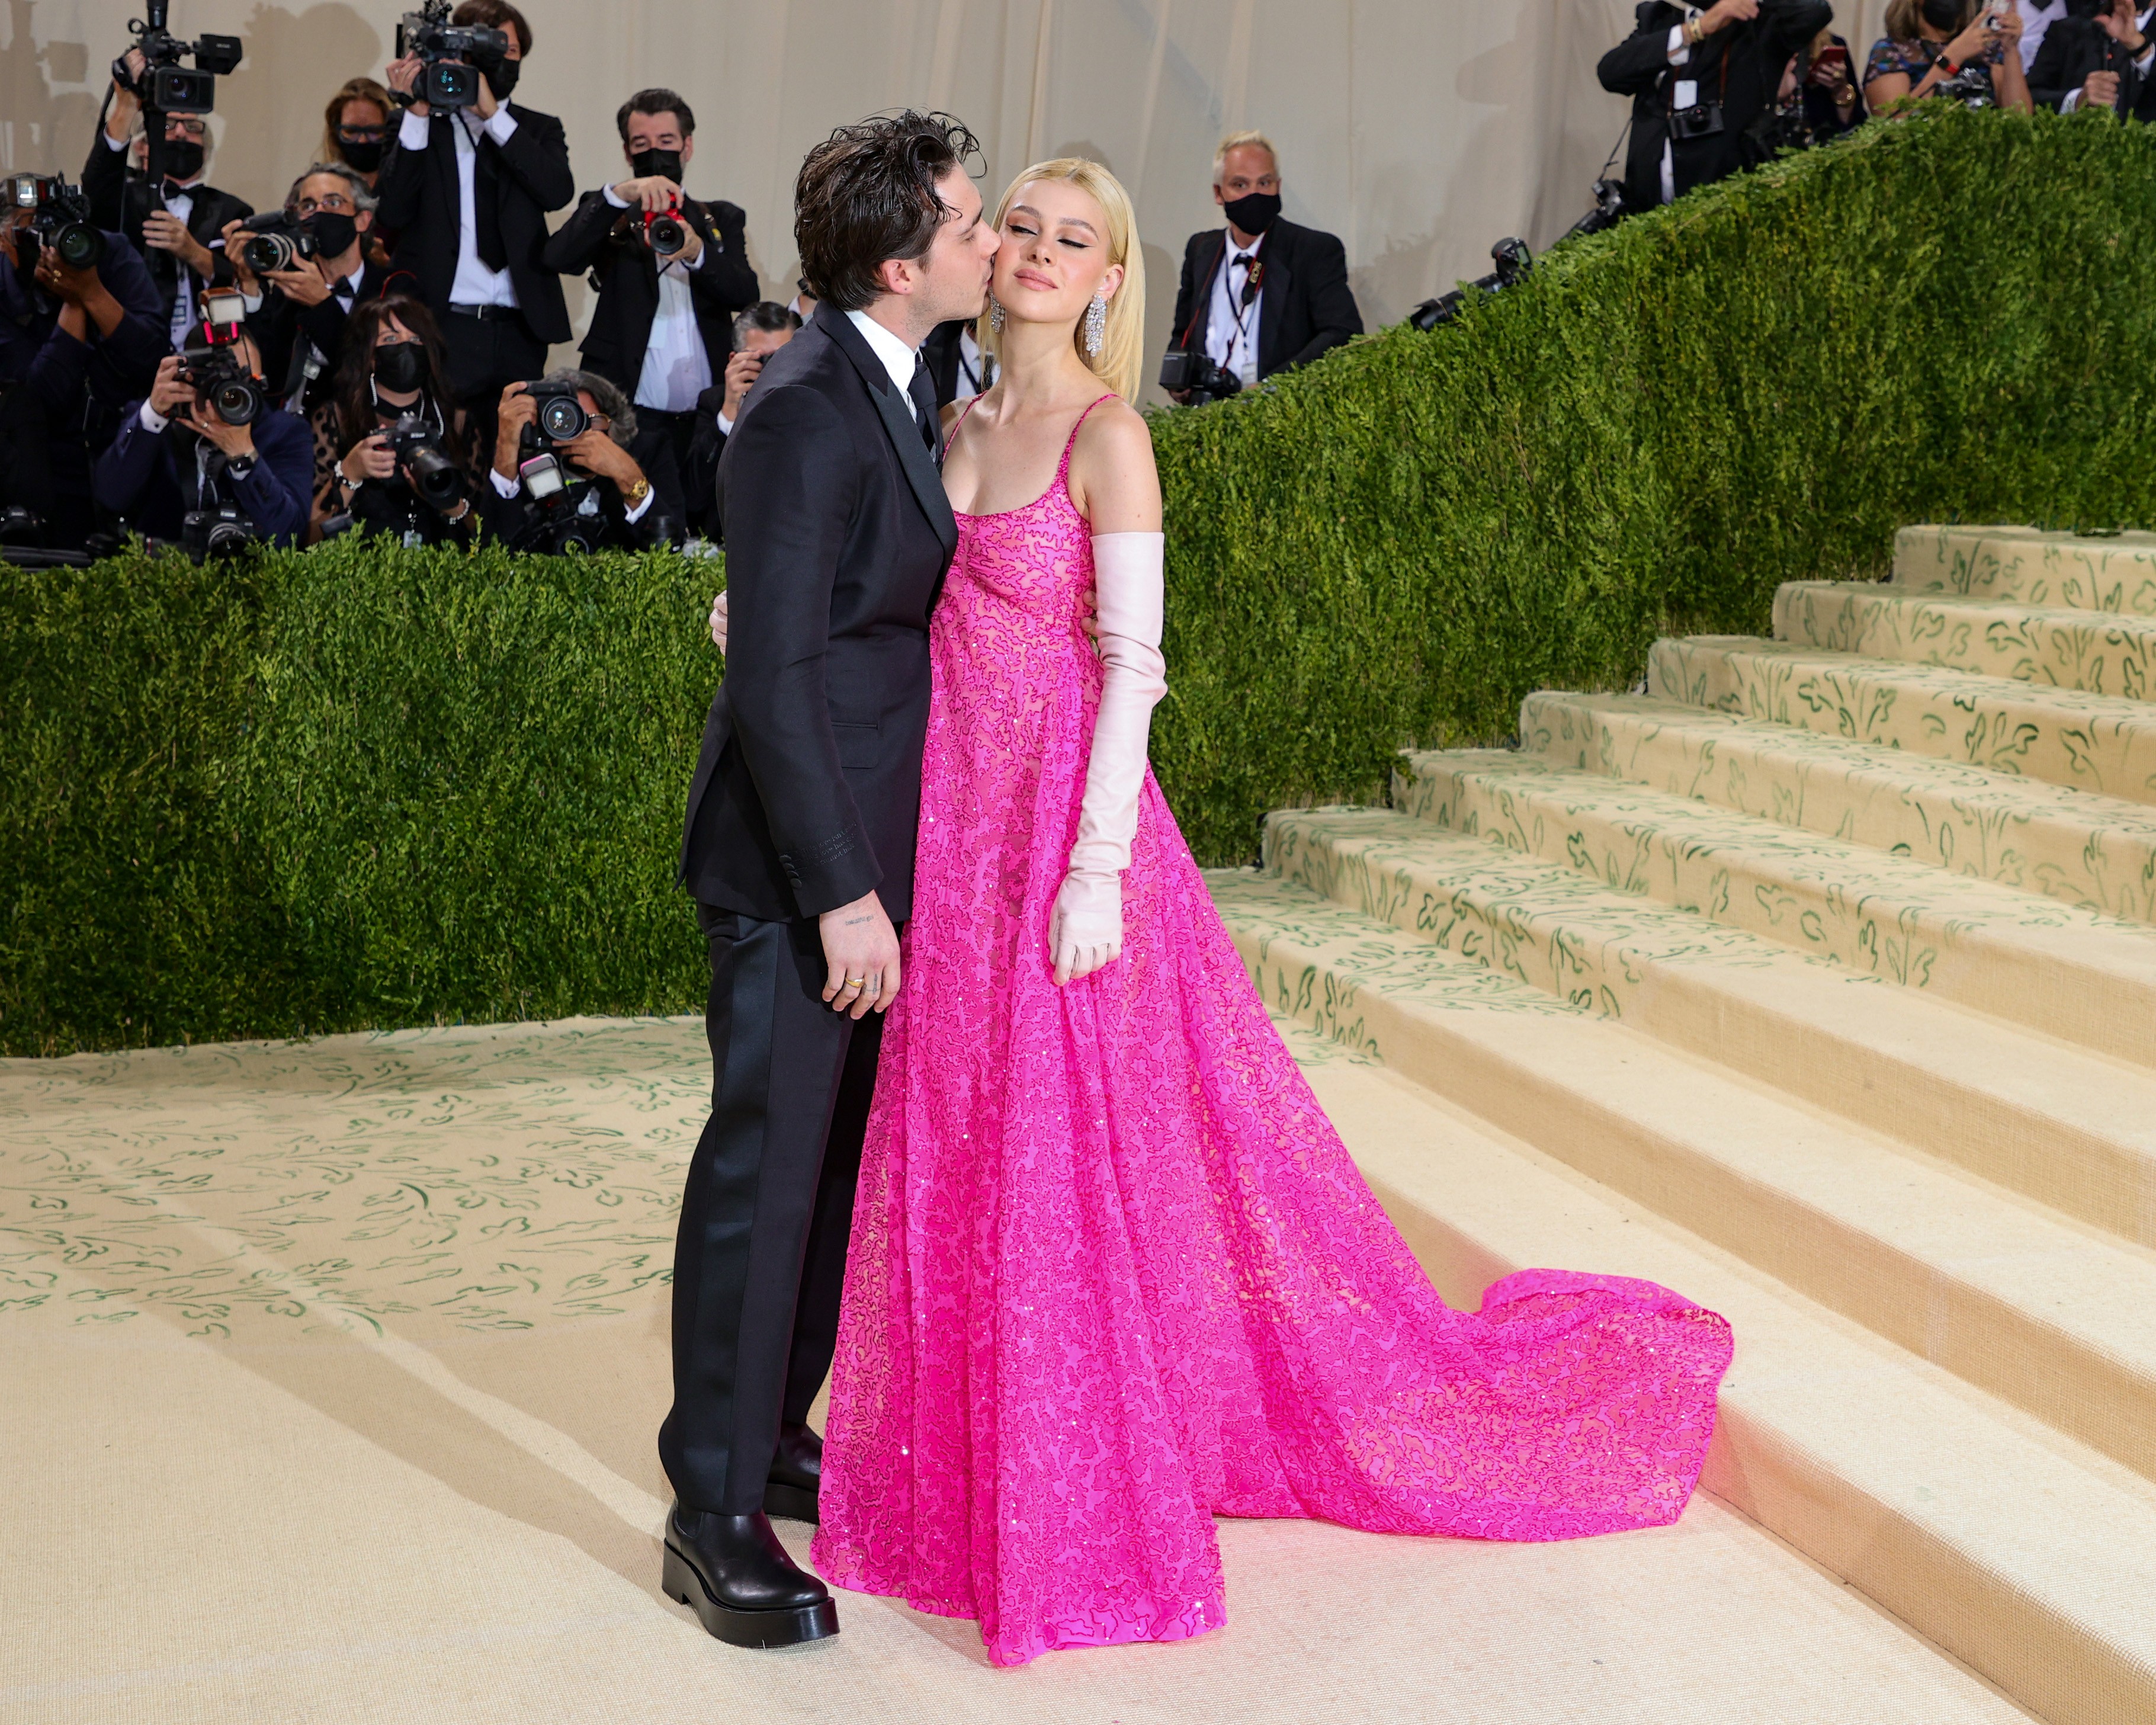 NEW YORK, NEW YORK - SEPTEMBER 13: Brooklyn Beckham and Nicola Peltz attend The 2021 Met Gala Celebrating In America: A Lexicon Of Fashion at Metropolitan Museum of Art on September 13, 2021 in New York City. (Photo by Theo Wargo/Getty Images) (Foto: Getty Images)